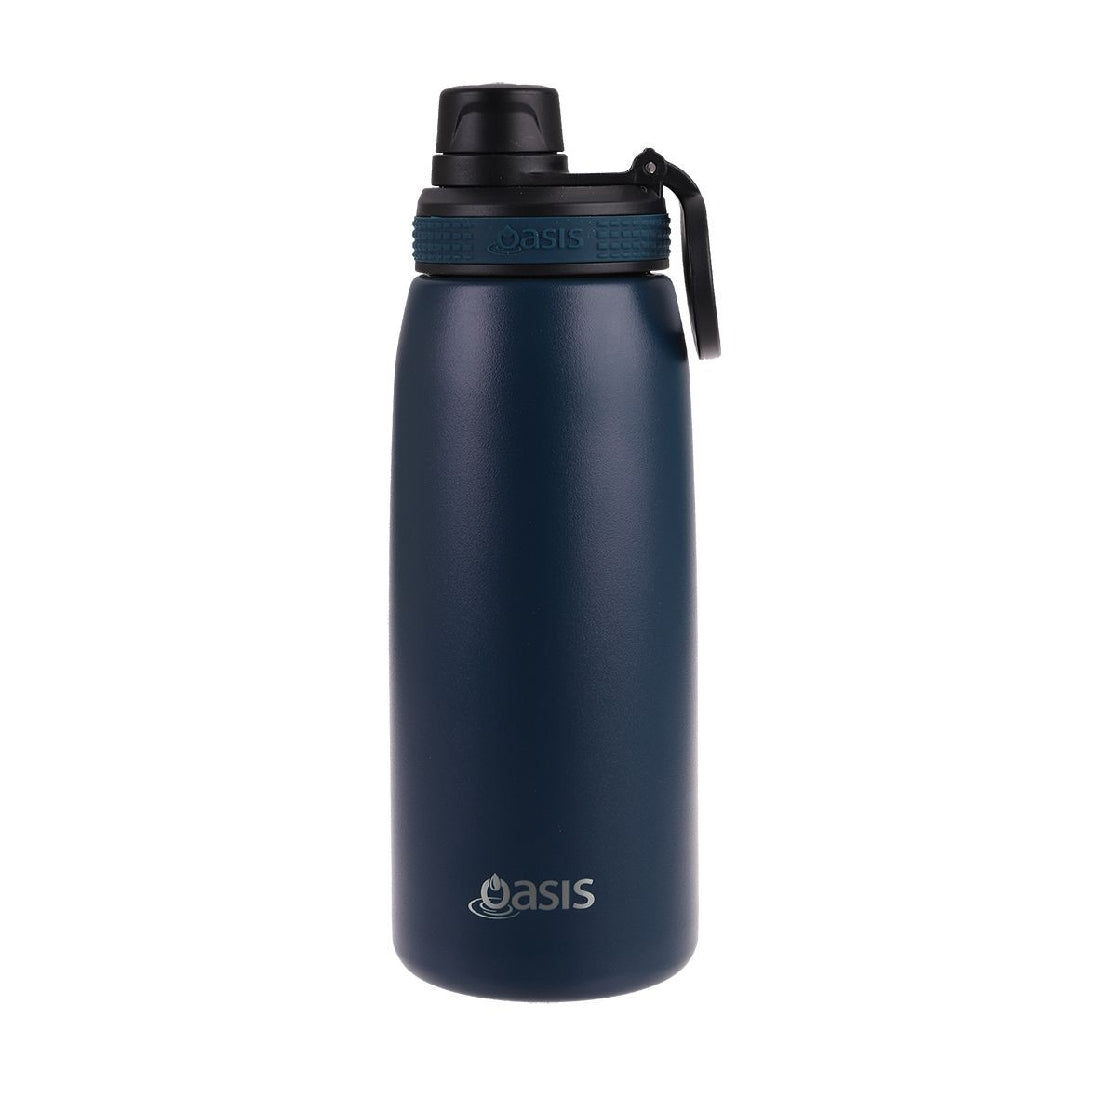 Oasis S/s Double Wall Insulated Sports Bottle W/ Screw-cap 780ml - Navy